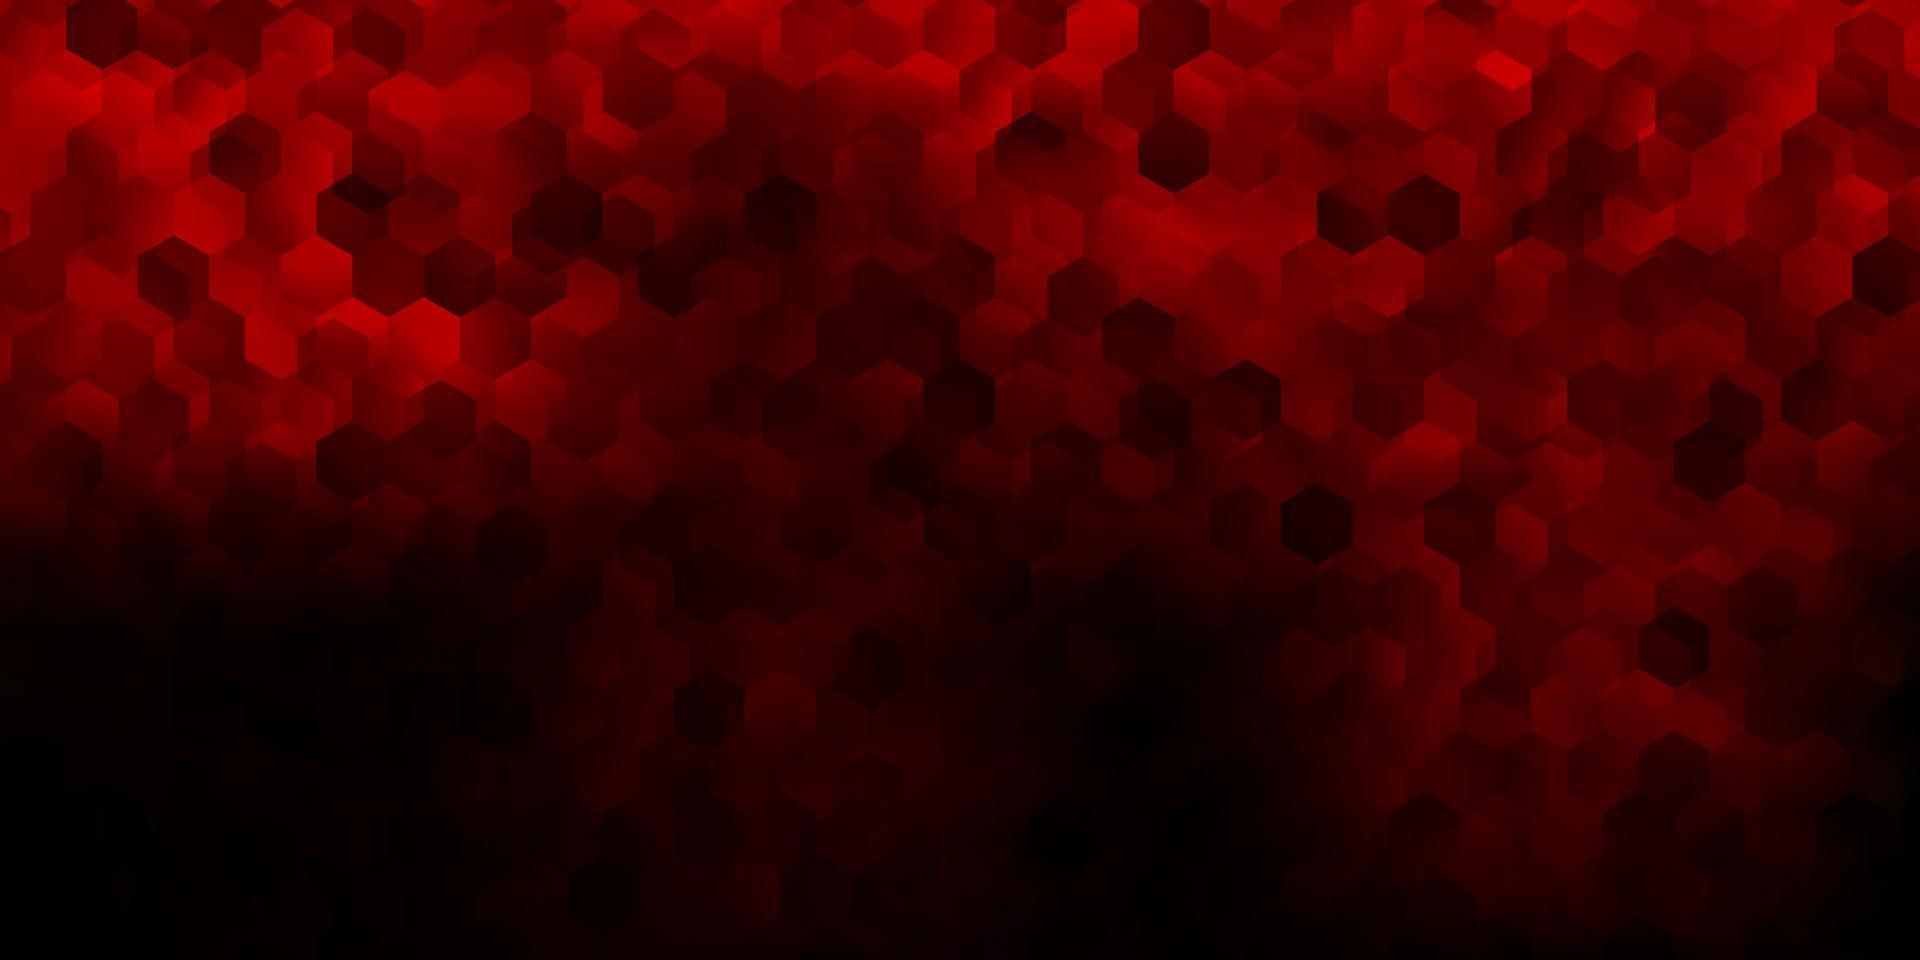 Dark red vector backdrop with a batch of hexagons.